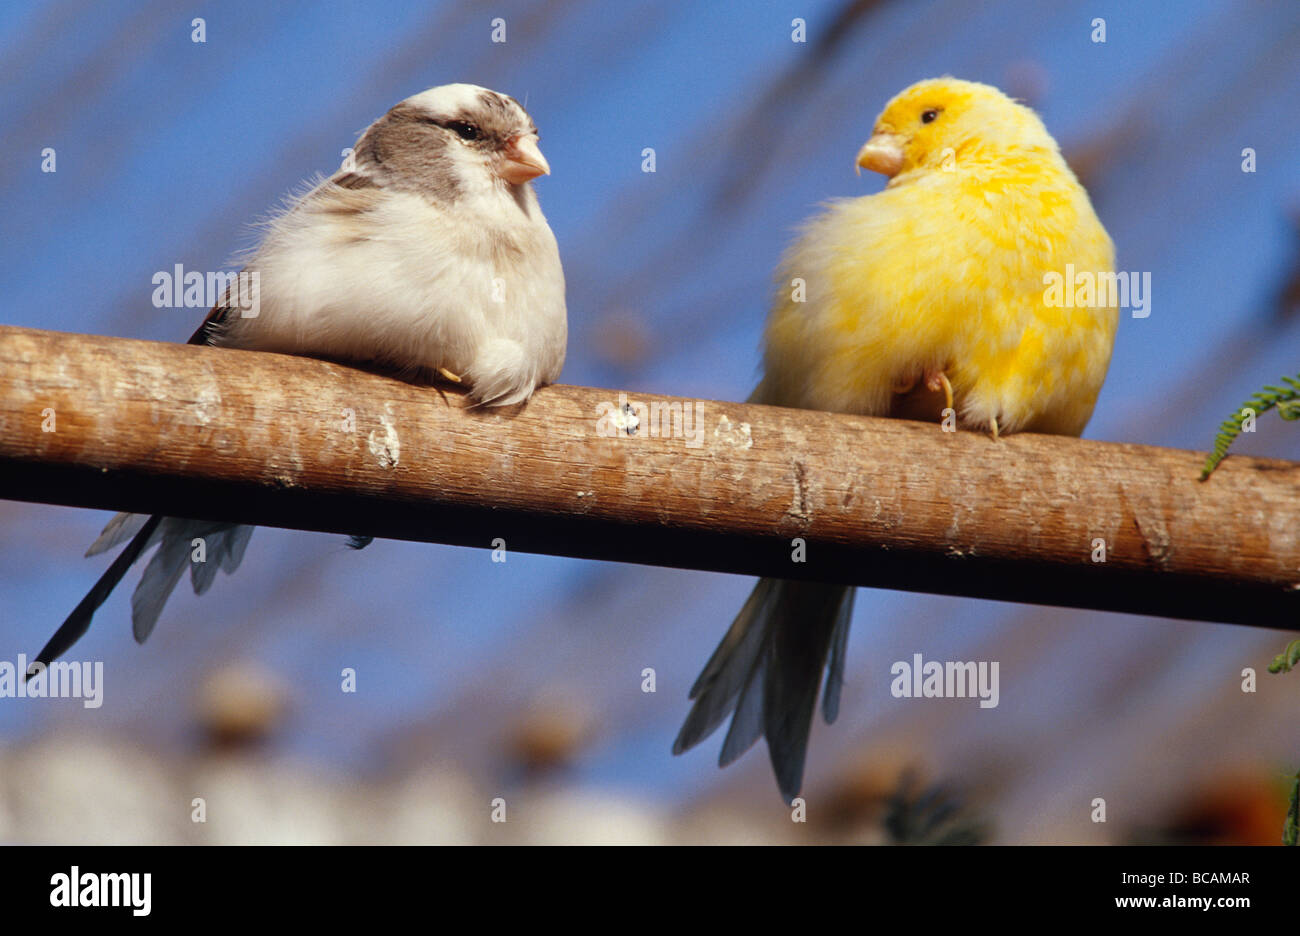 Two Canaries contentedly seated on a perch in an aviary. Stock Photo